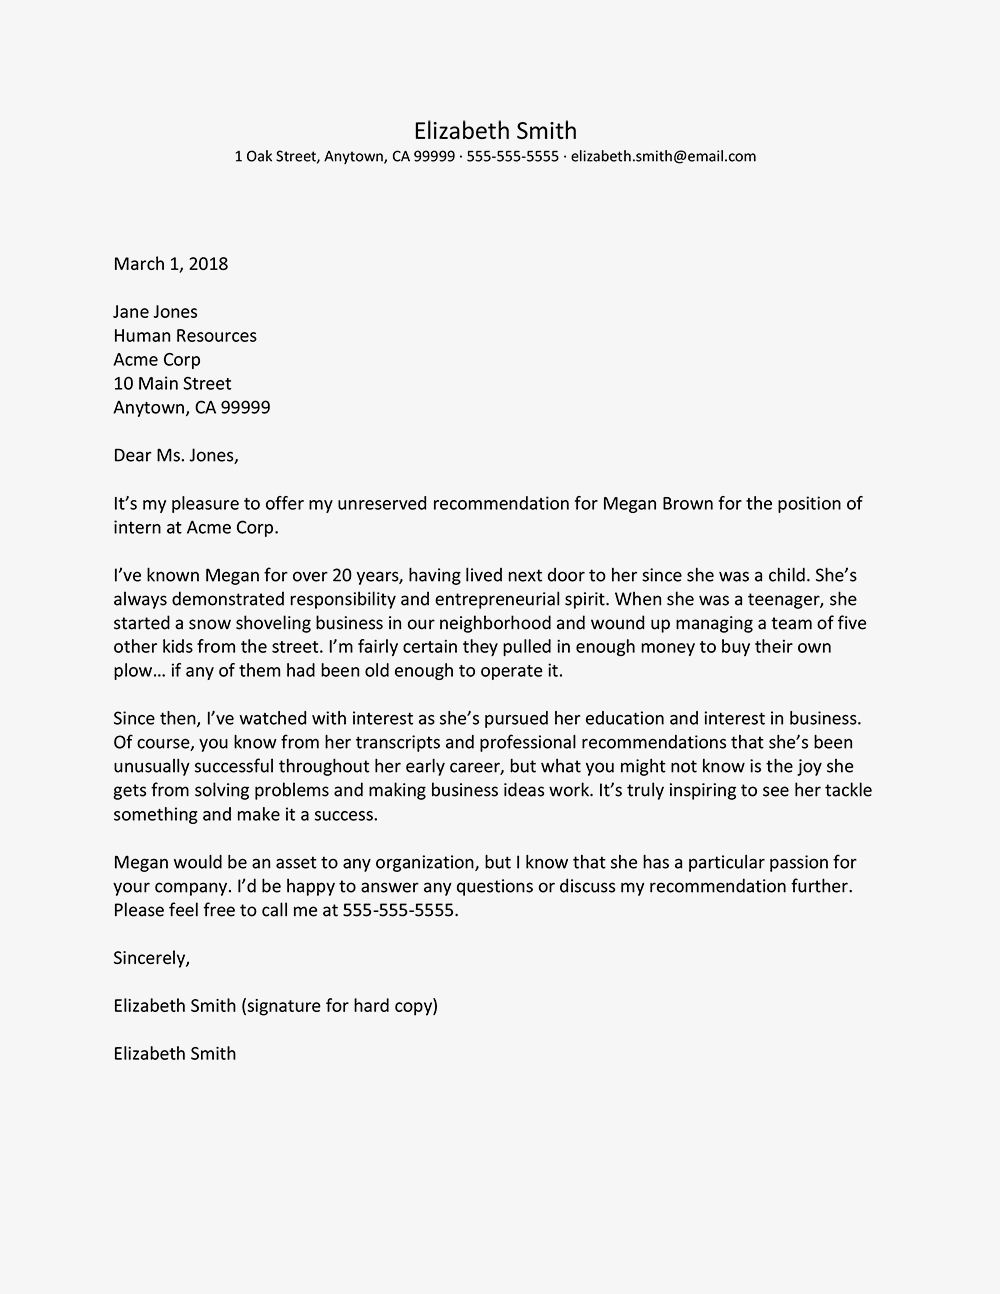 Recommendation Letter Template Personal Letter Of Recommendation Sample For Student Cablo